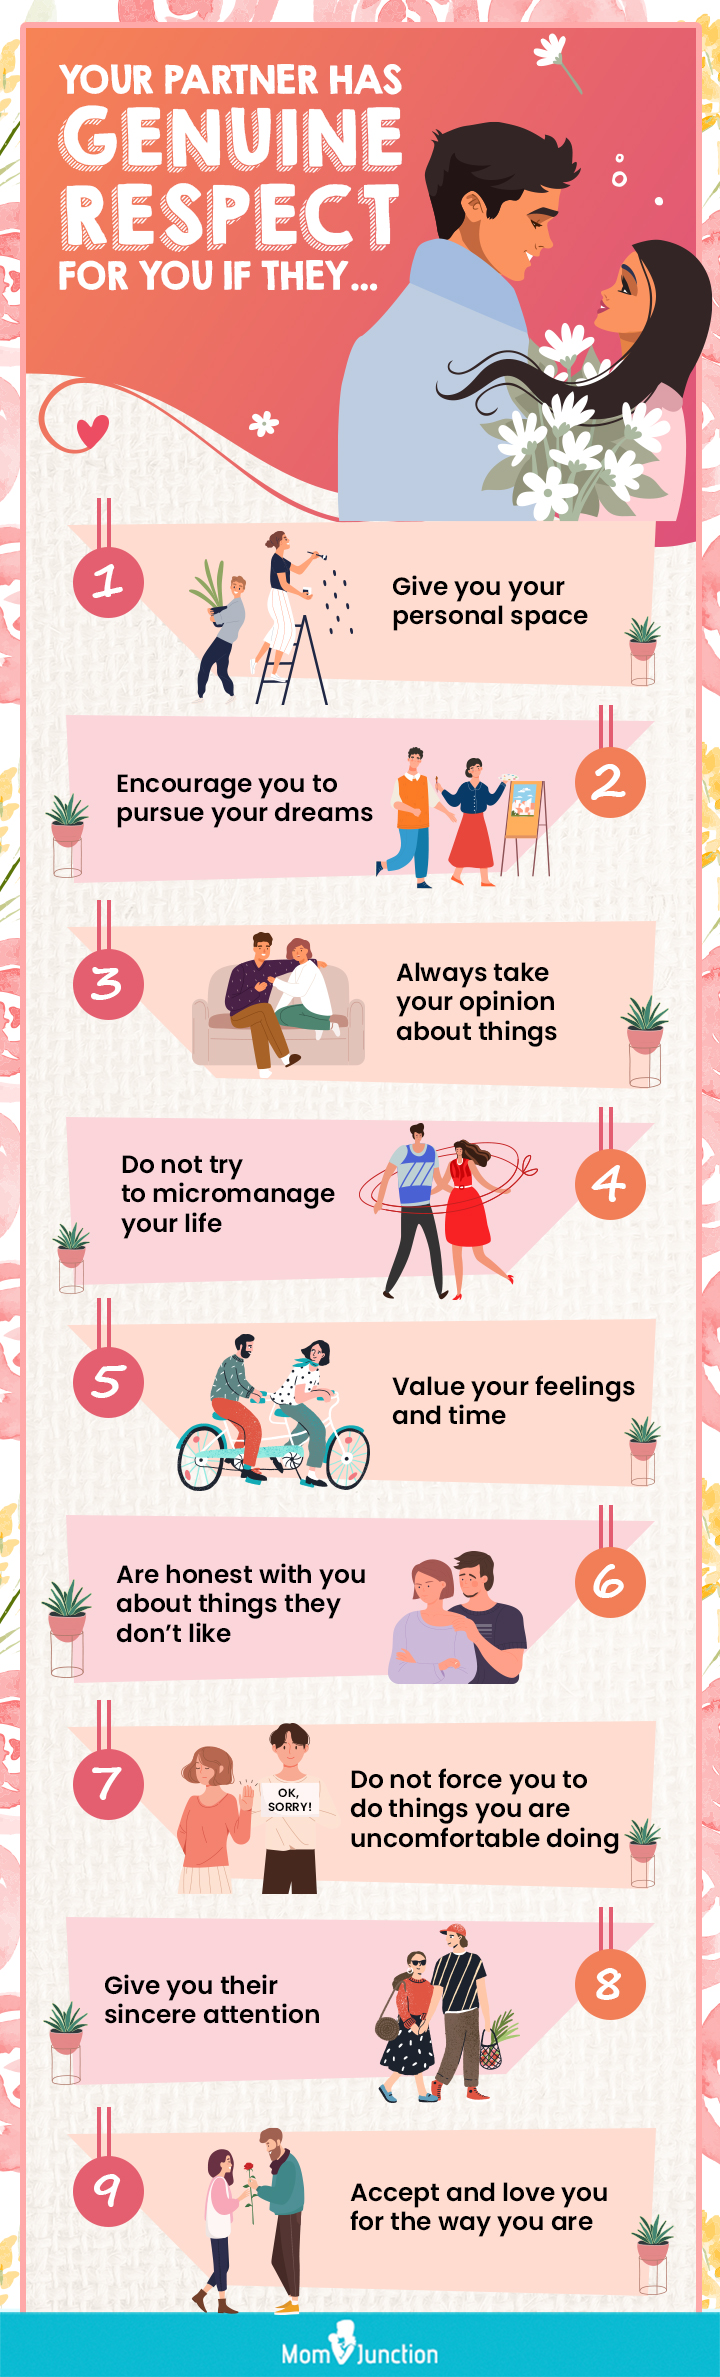 your partner has genuine respect for you if they (infographic)